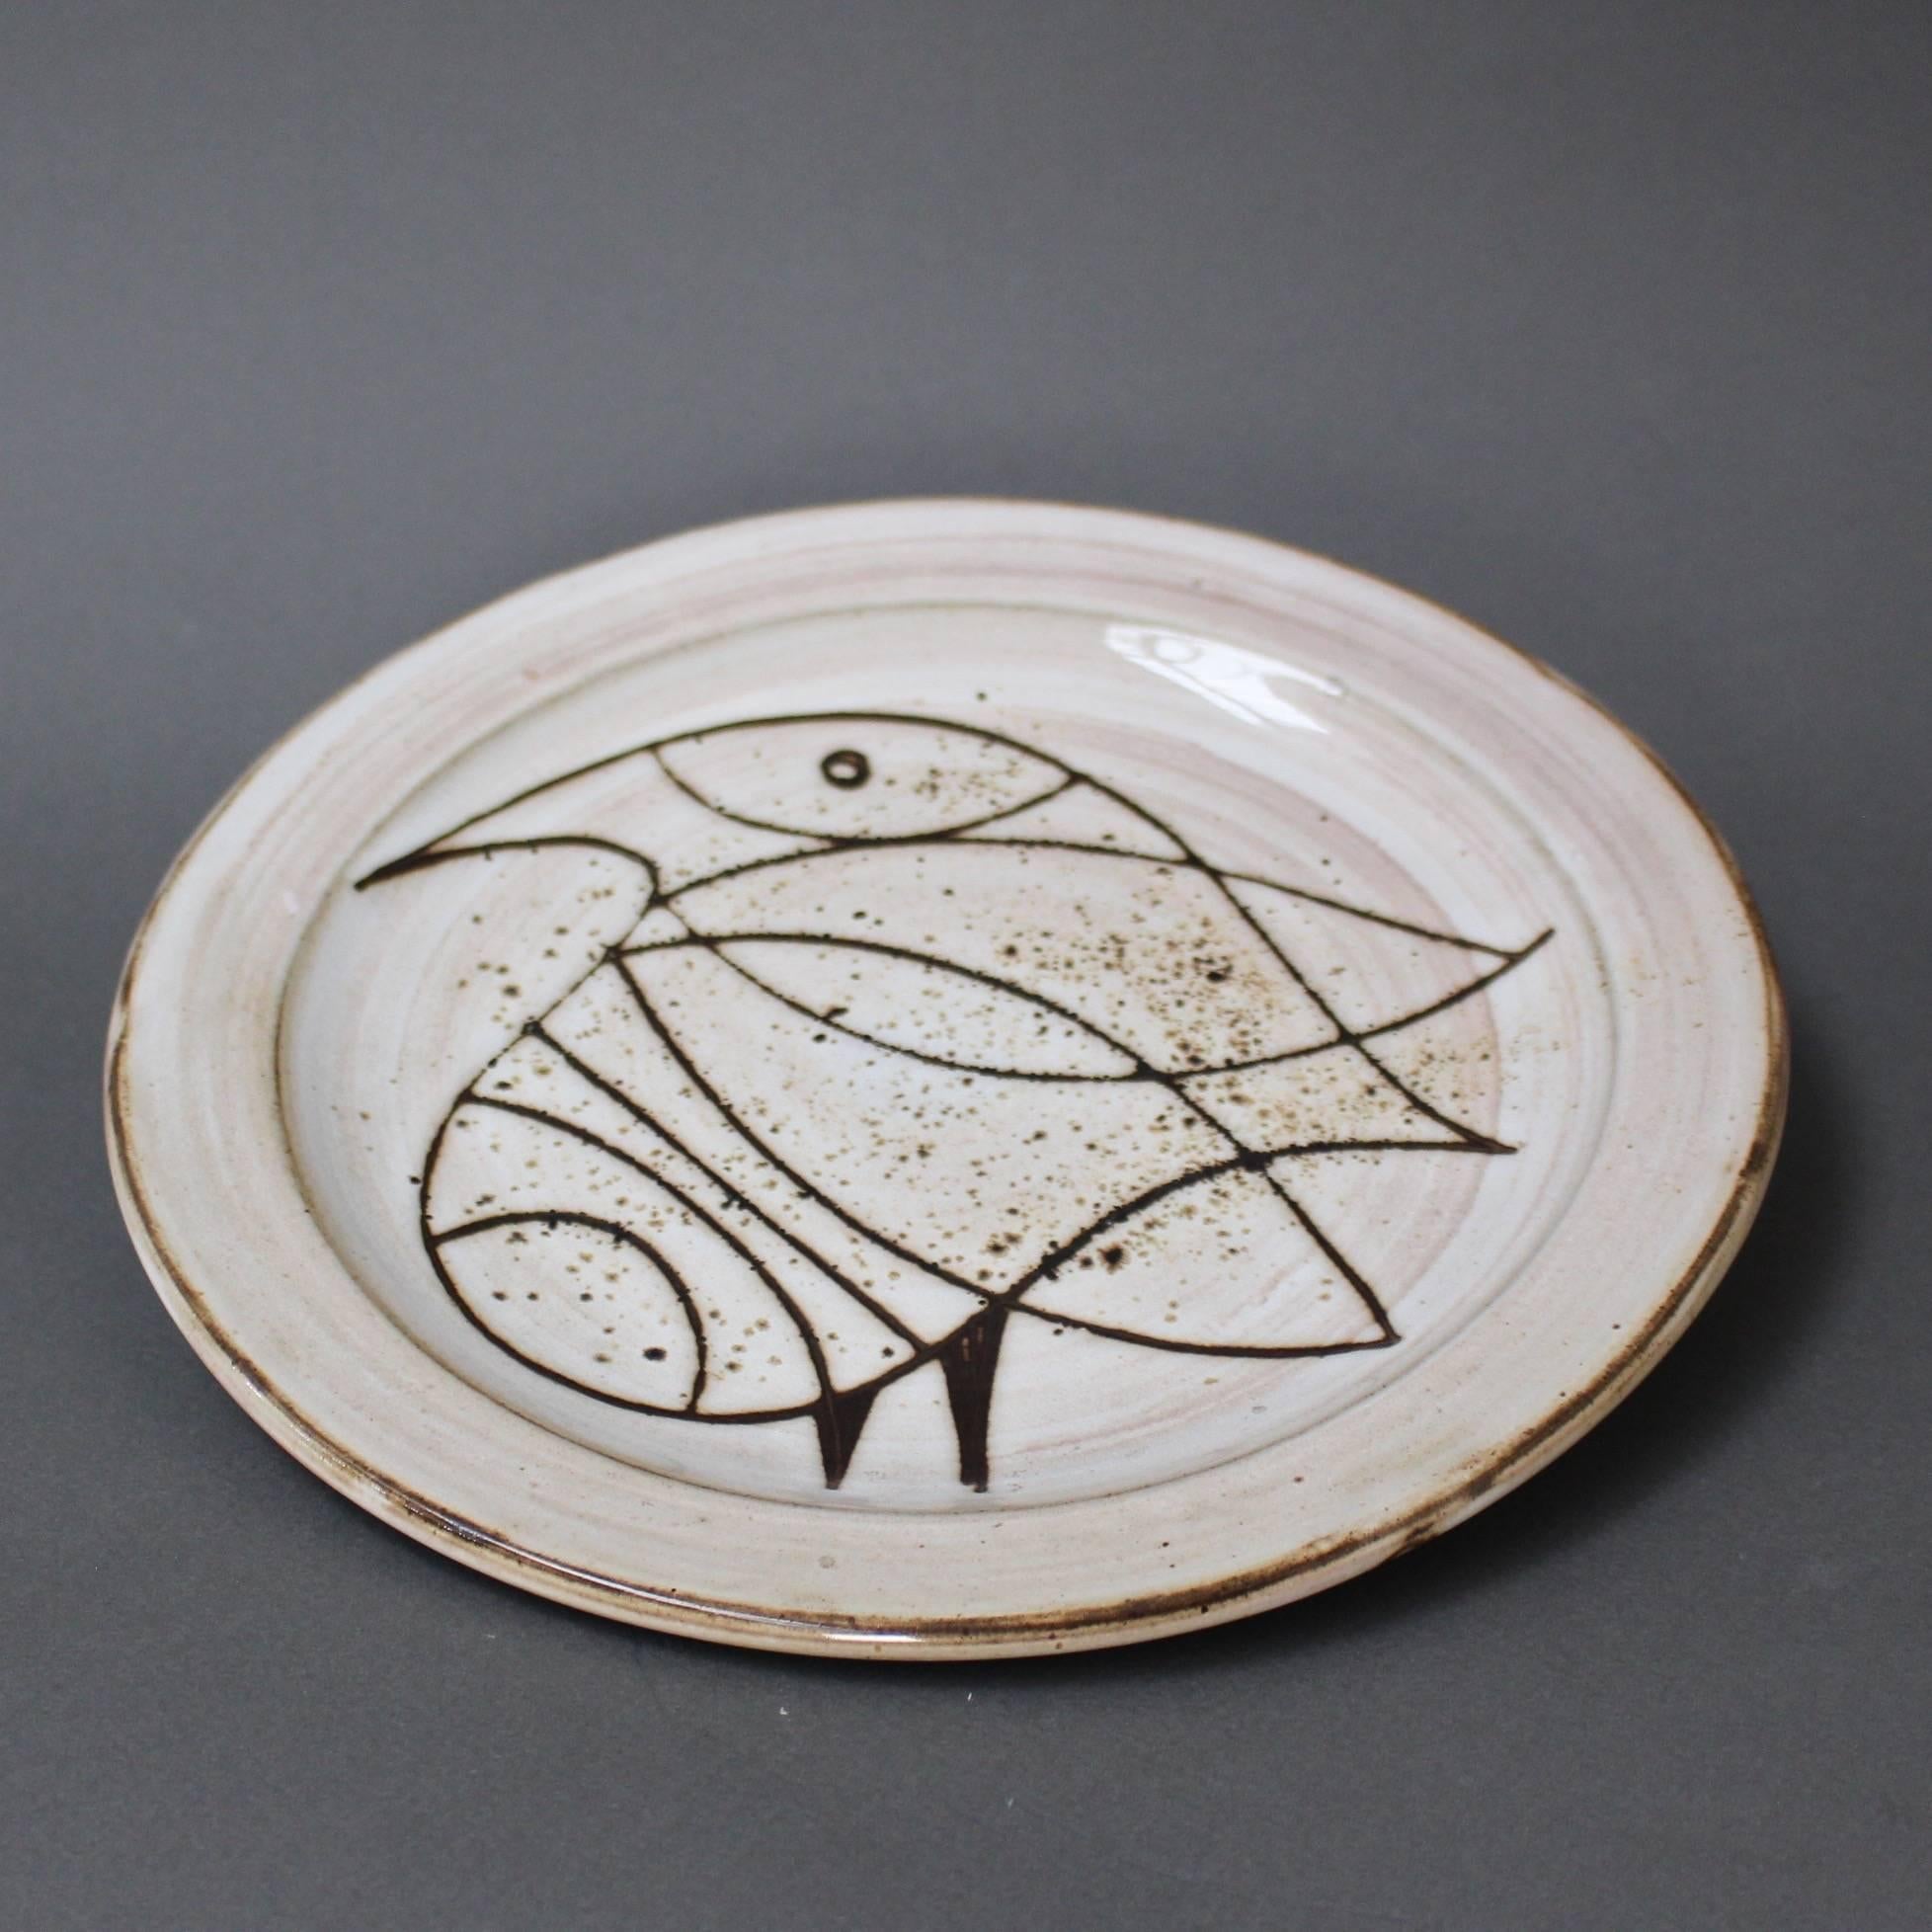 French Mid-century Ceramic Plate with Stylised Bird by Jacques Pouchain, circa 1950s